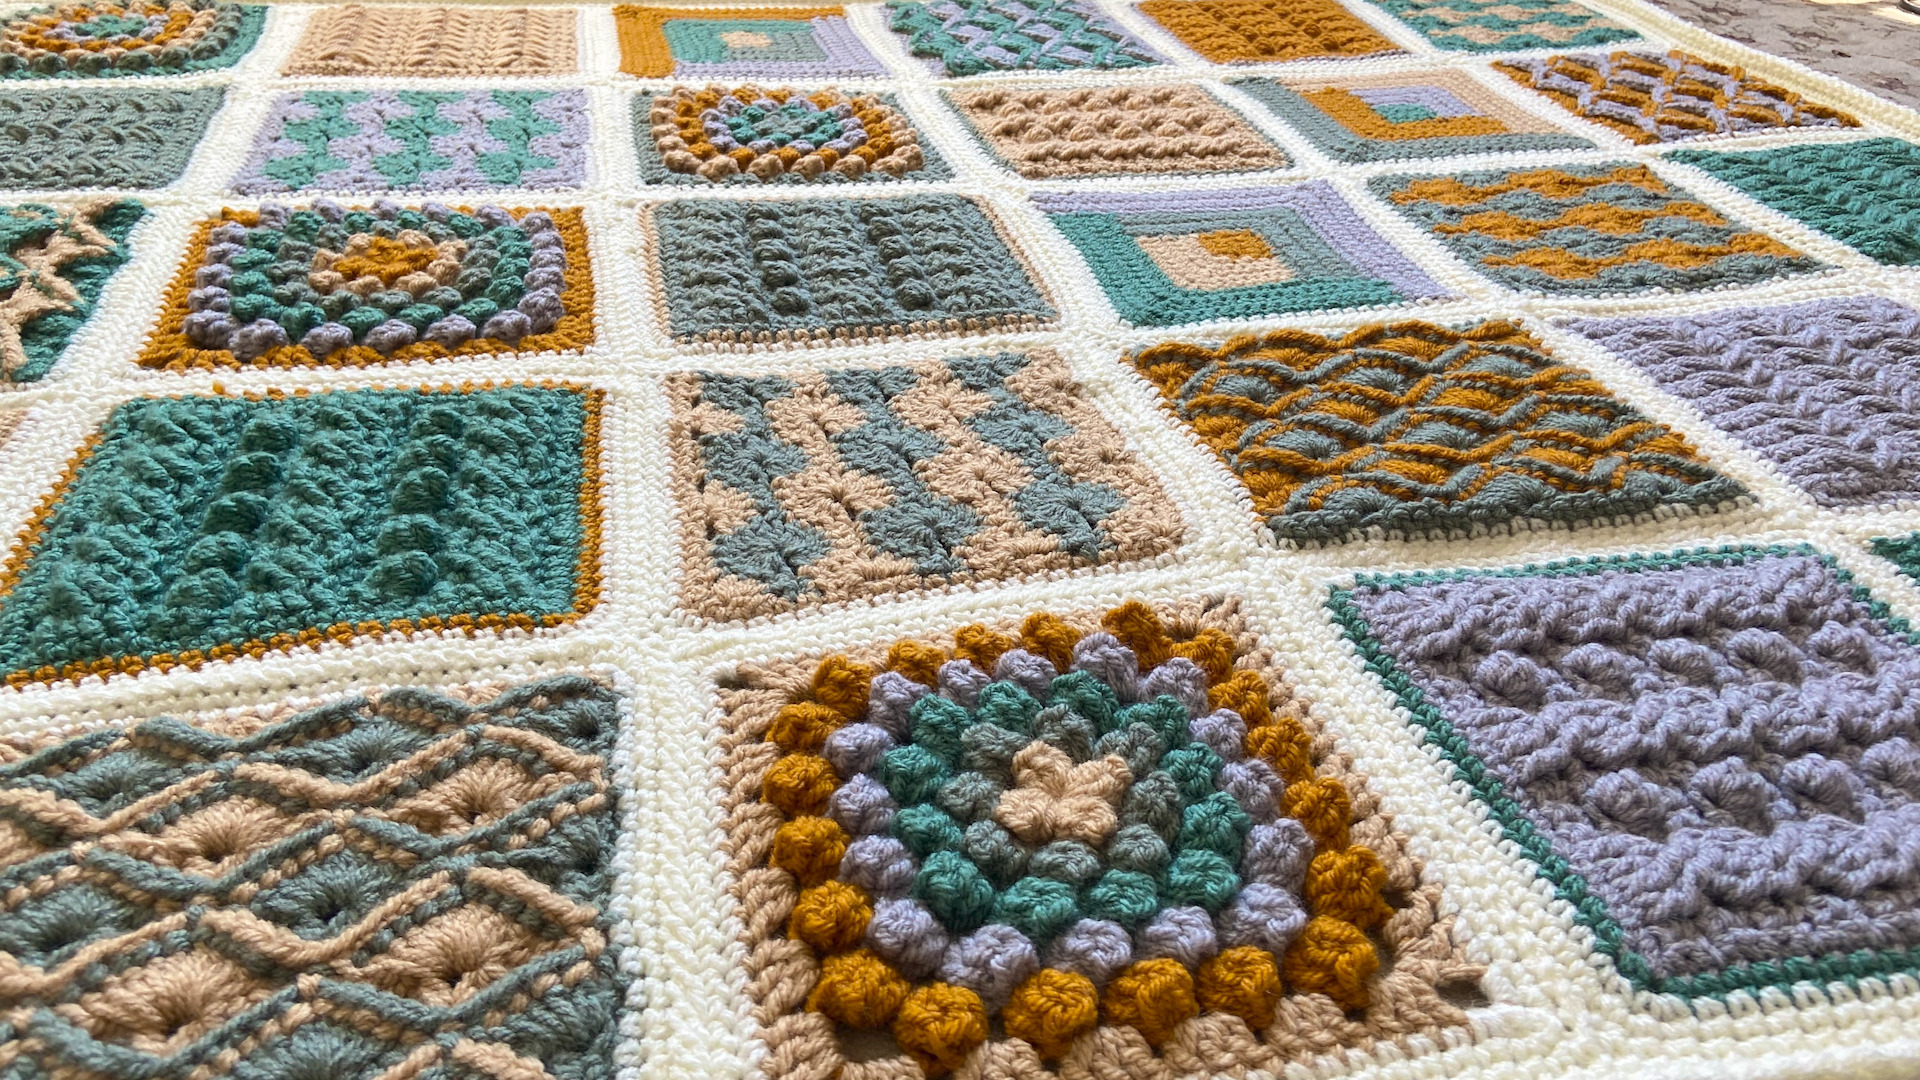 My Granny Square Obsession – The Corner of Craft